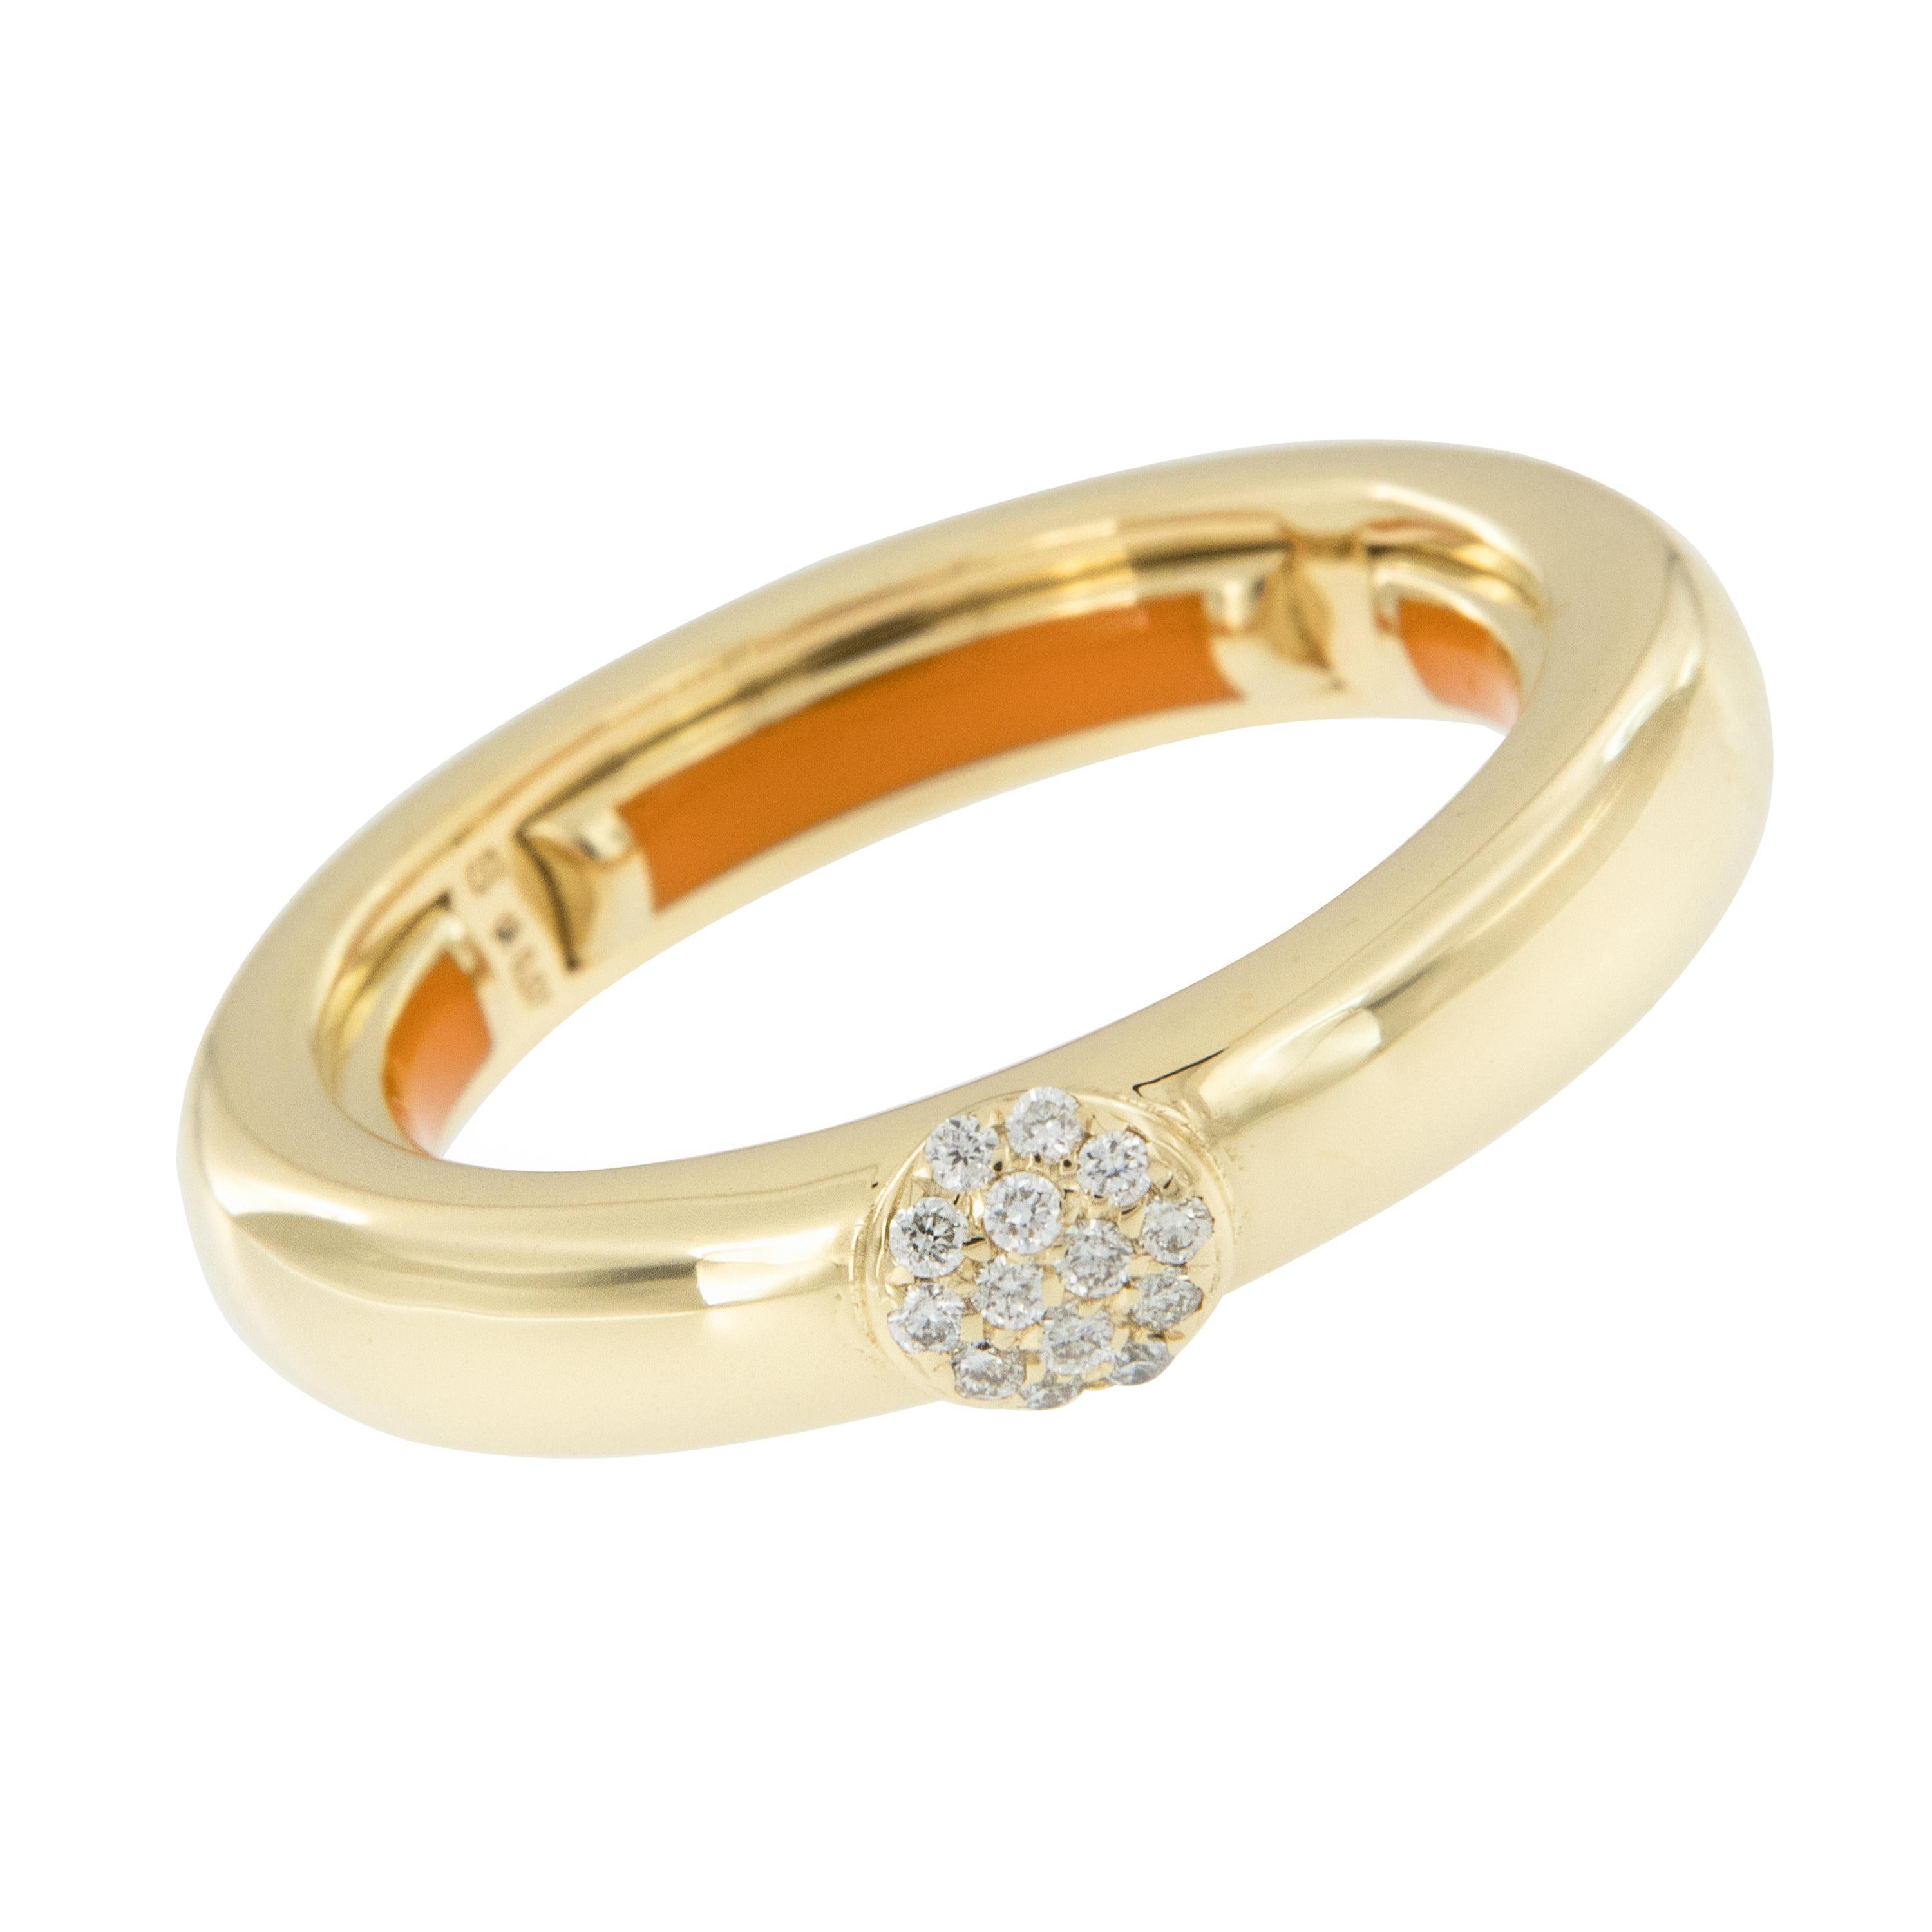 Bold, bright and beautiful! This contemporary ring is hand-crafted in Italy for Campanelli & Pear. Ring is 18k yellow gold featuring 0.07 Cttw pave' set diamonds in round center. The ring features a unique adjustable innerspring to fit 5-6.5 ring